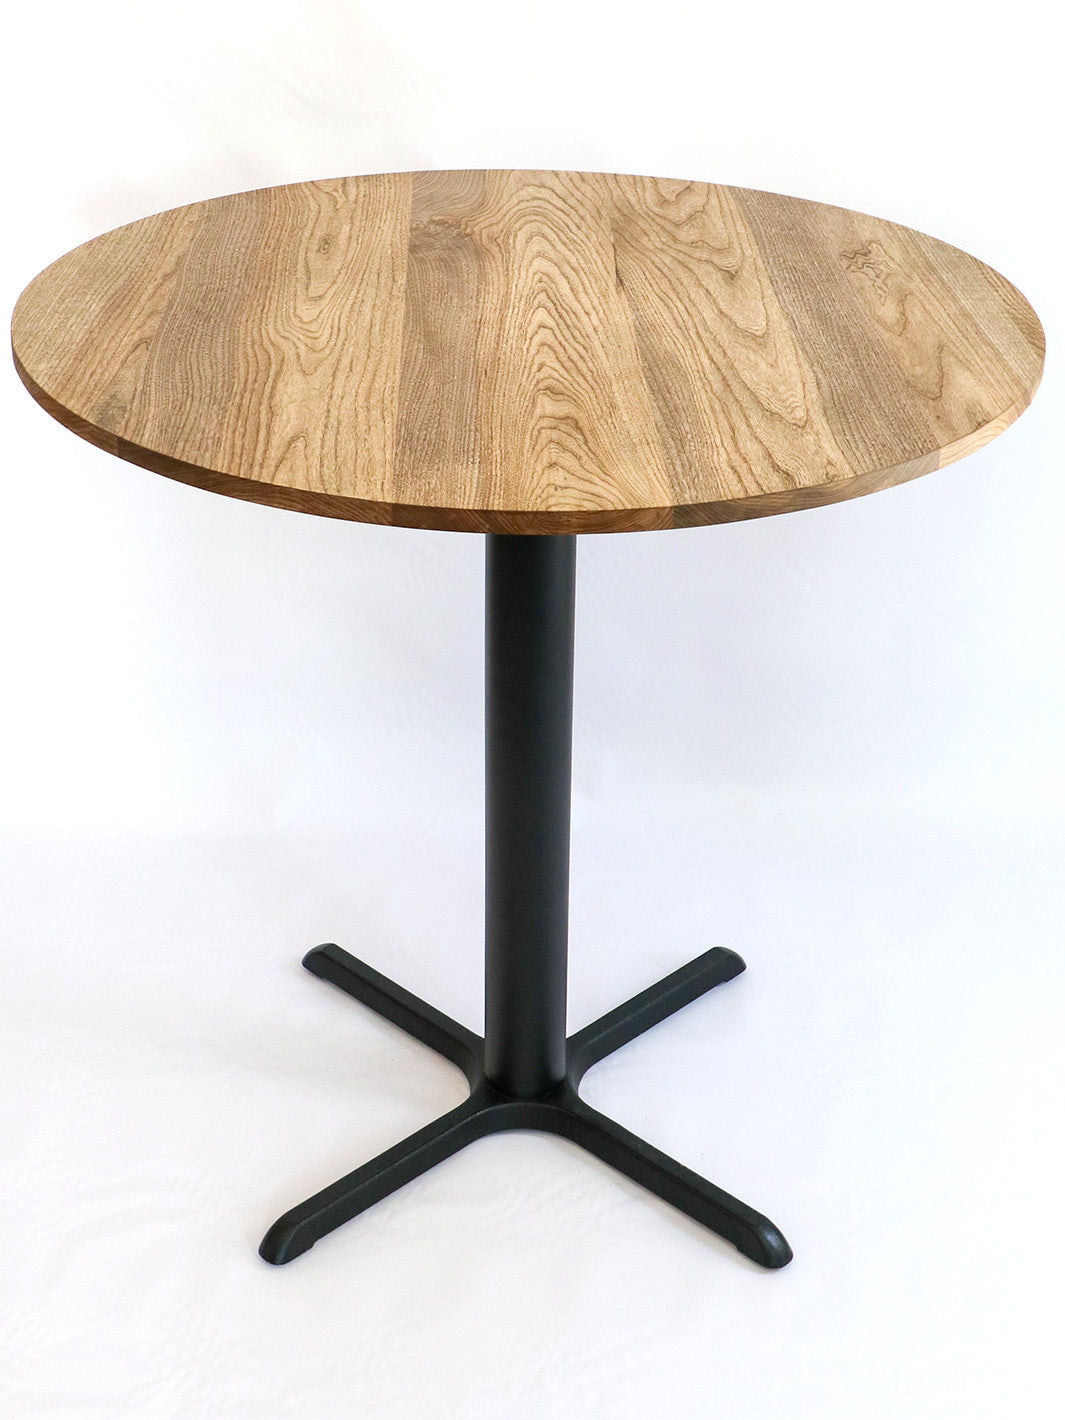 Modern Round Hackberry Pub Table with Black Steel Legs   |   Bar or Standard Height